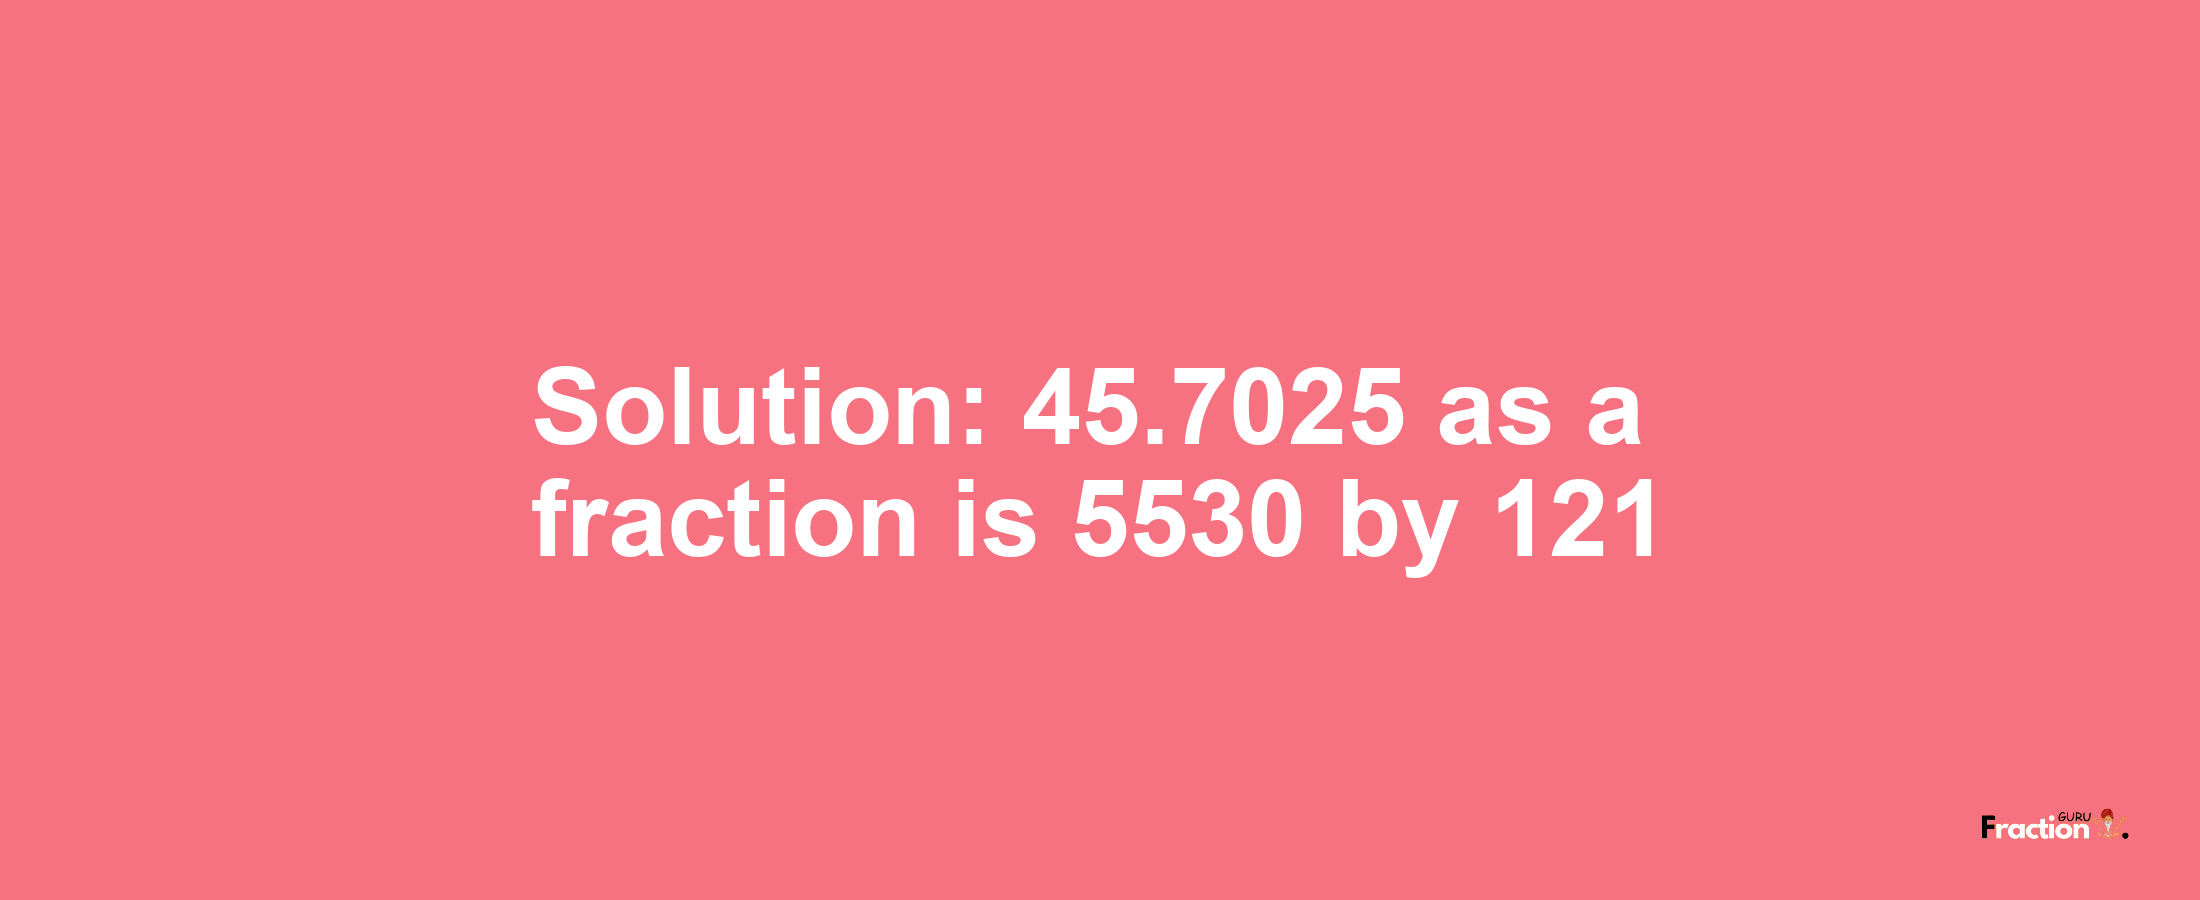 Solution:45.7025 as a fraction is 5530/121